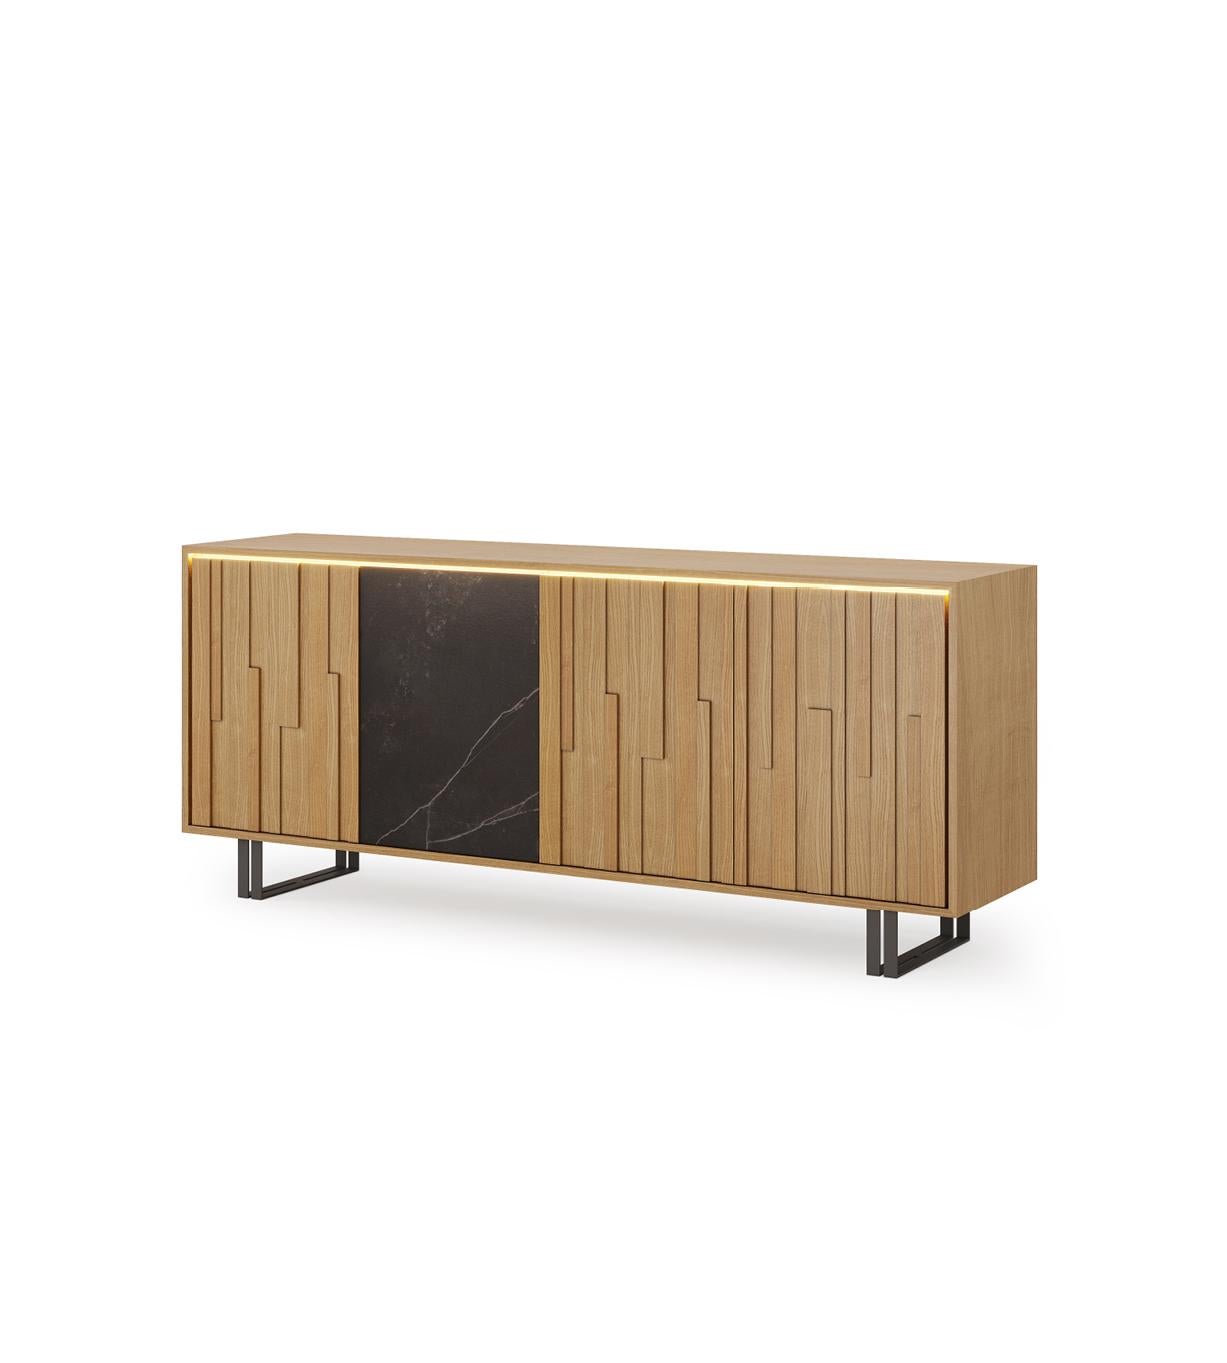 The Everest Sideboard is designed to endure beyond trends, house moves and life changes. A modern yet beautifully simple design, that highlights great craftsmanship through its overlaid wooden facade. 